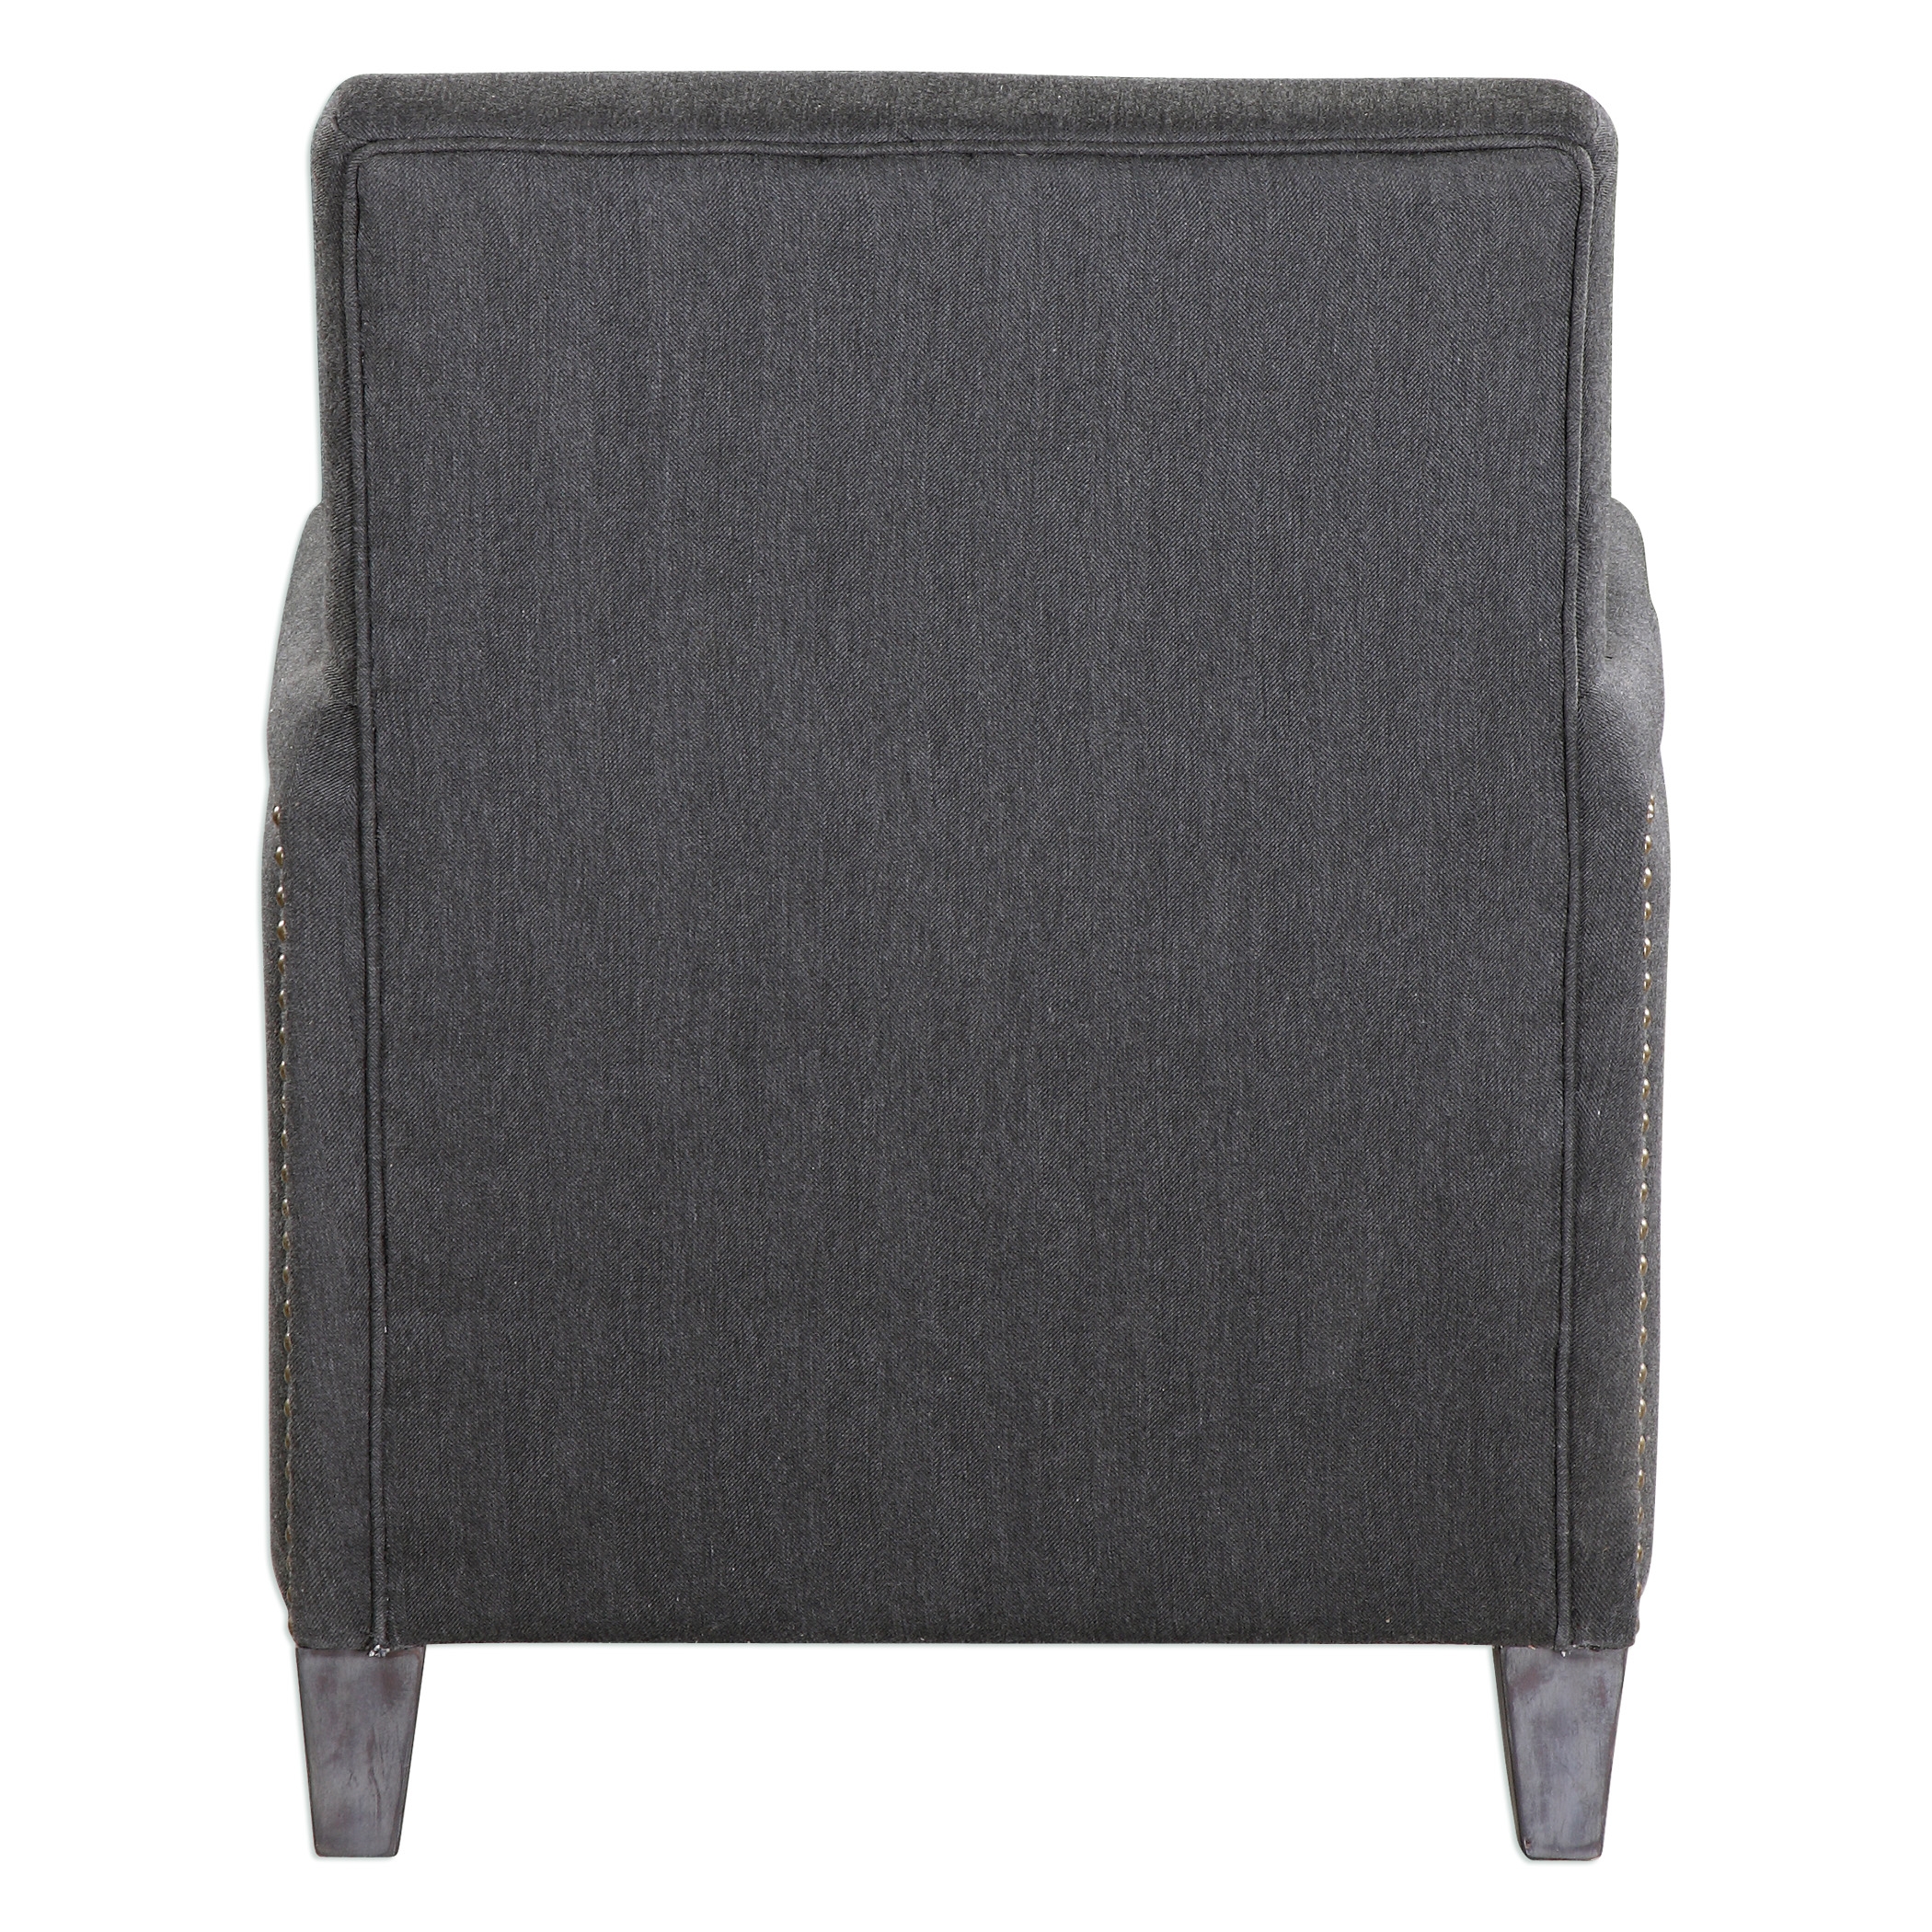 Connolly Charcoal Armchair - Image 2